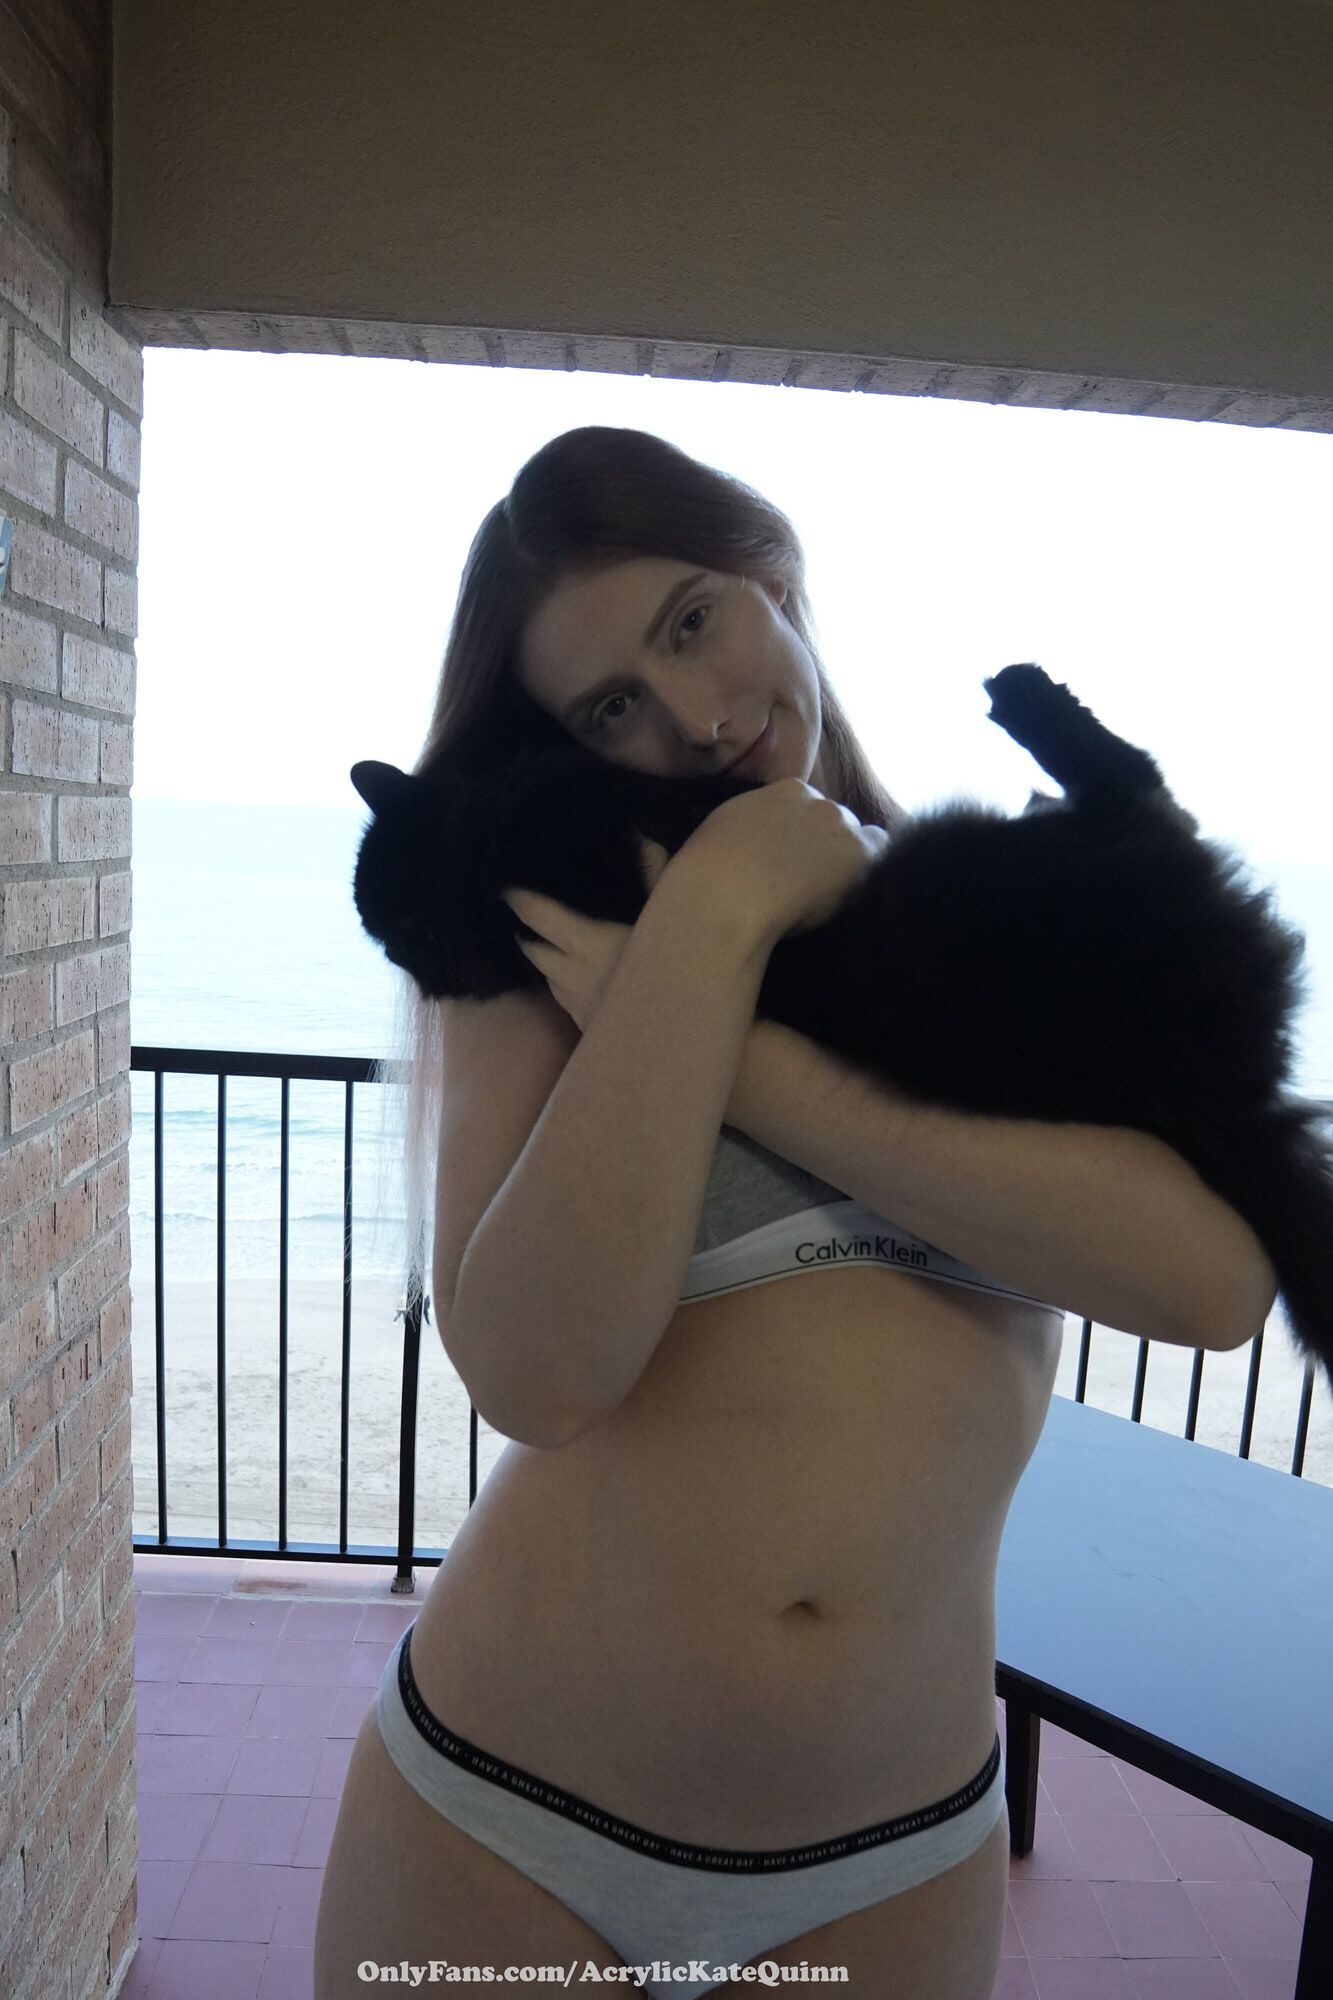 Just me and a cute pussy